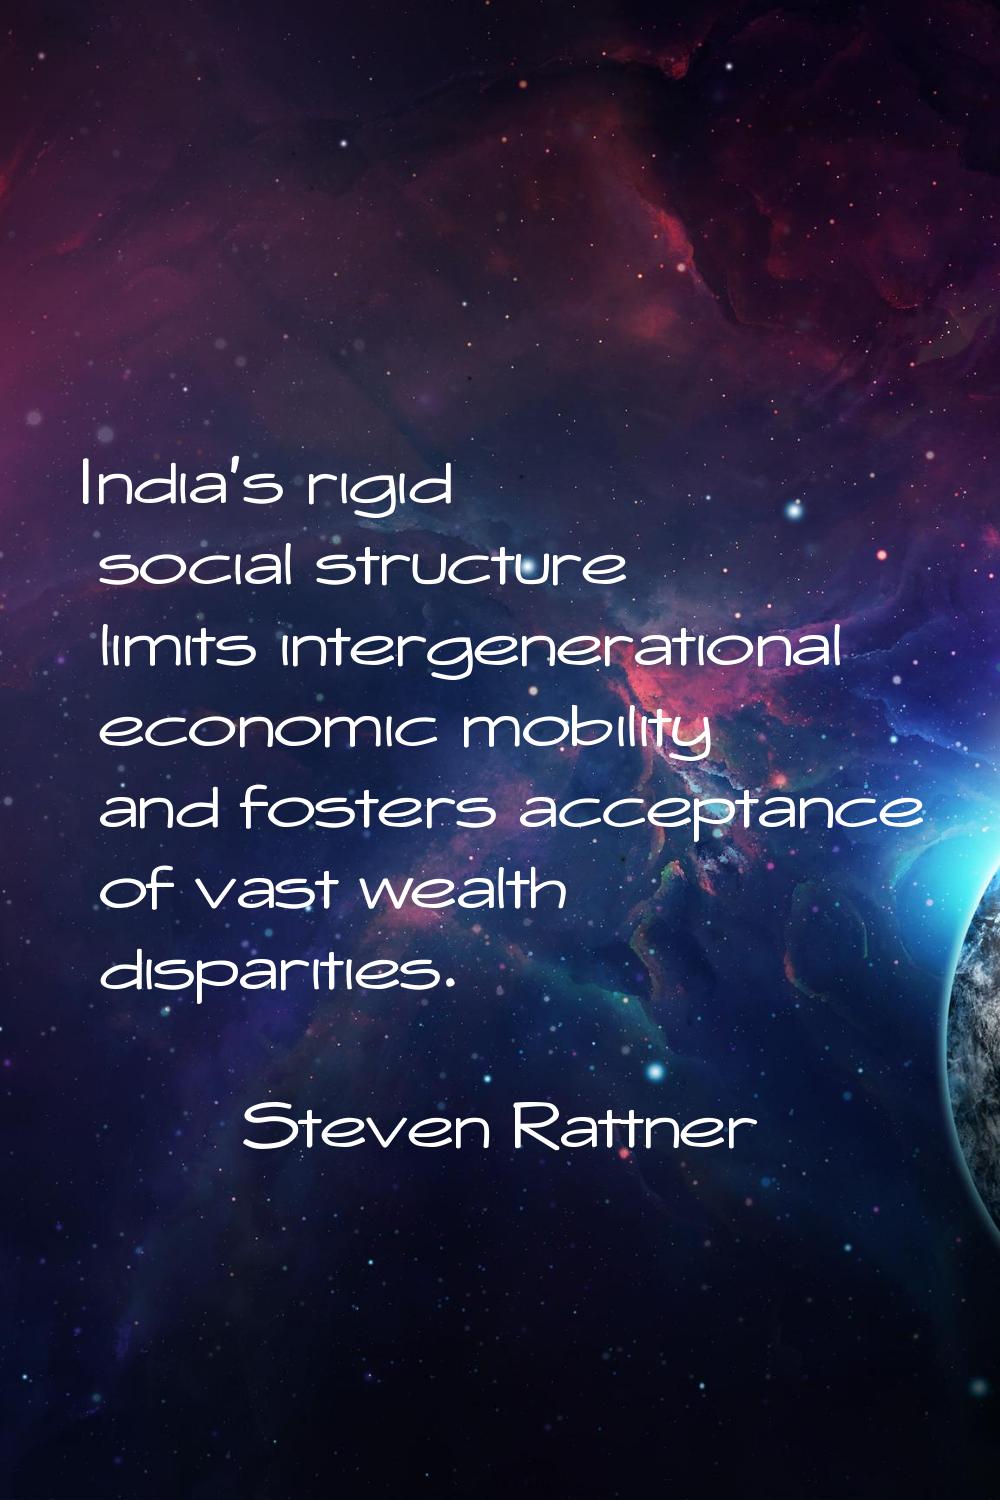 India's rigid social structure limits intergenerational economic mobility and fosters acceptance of